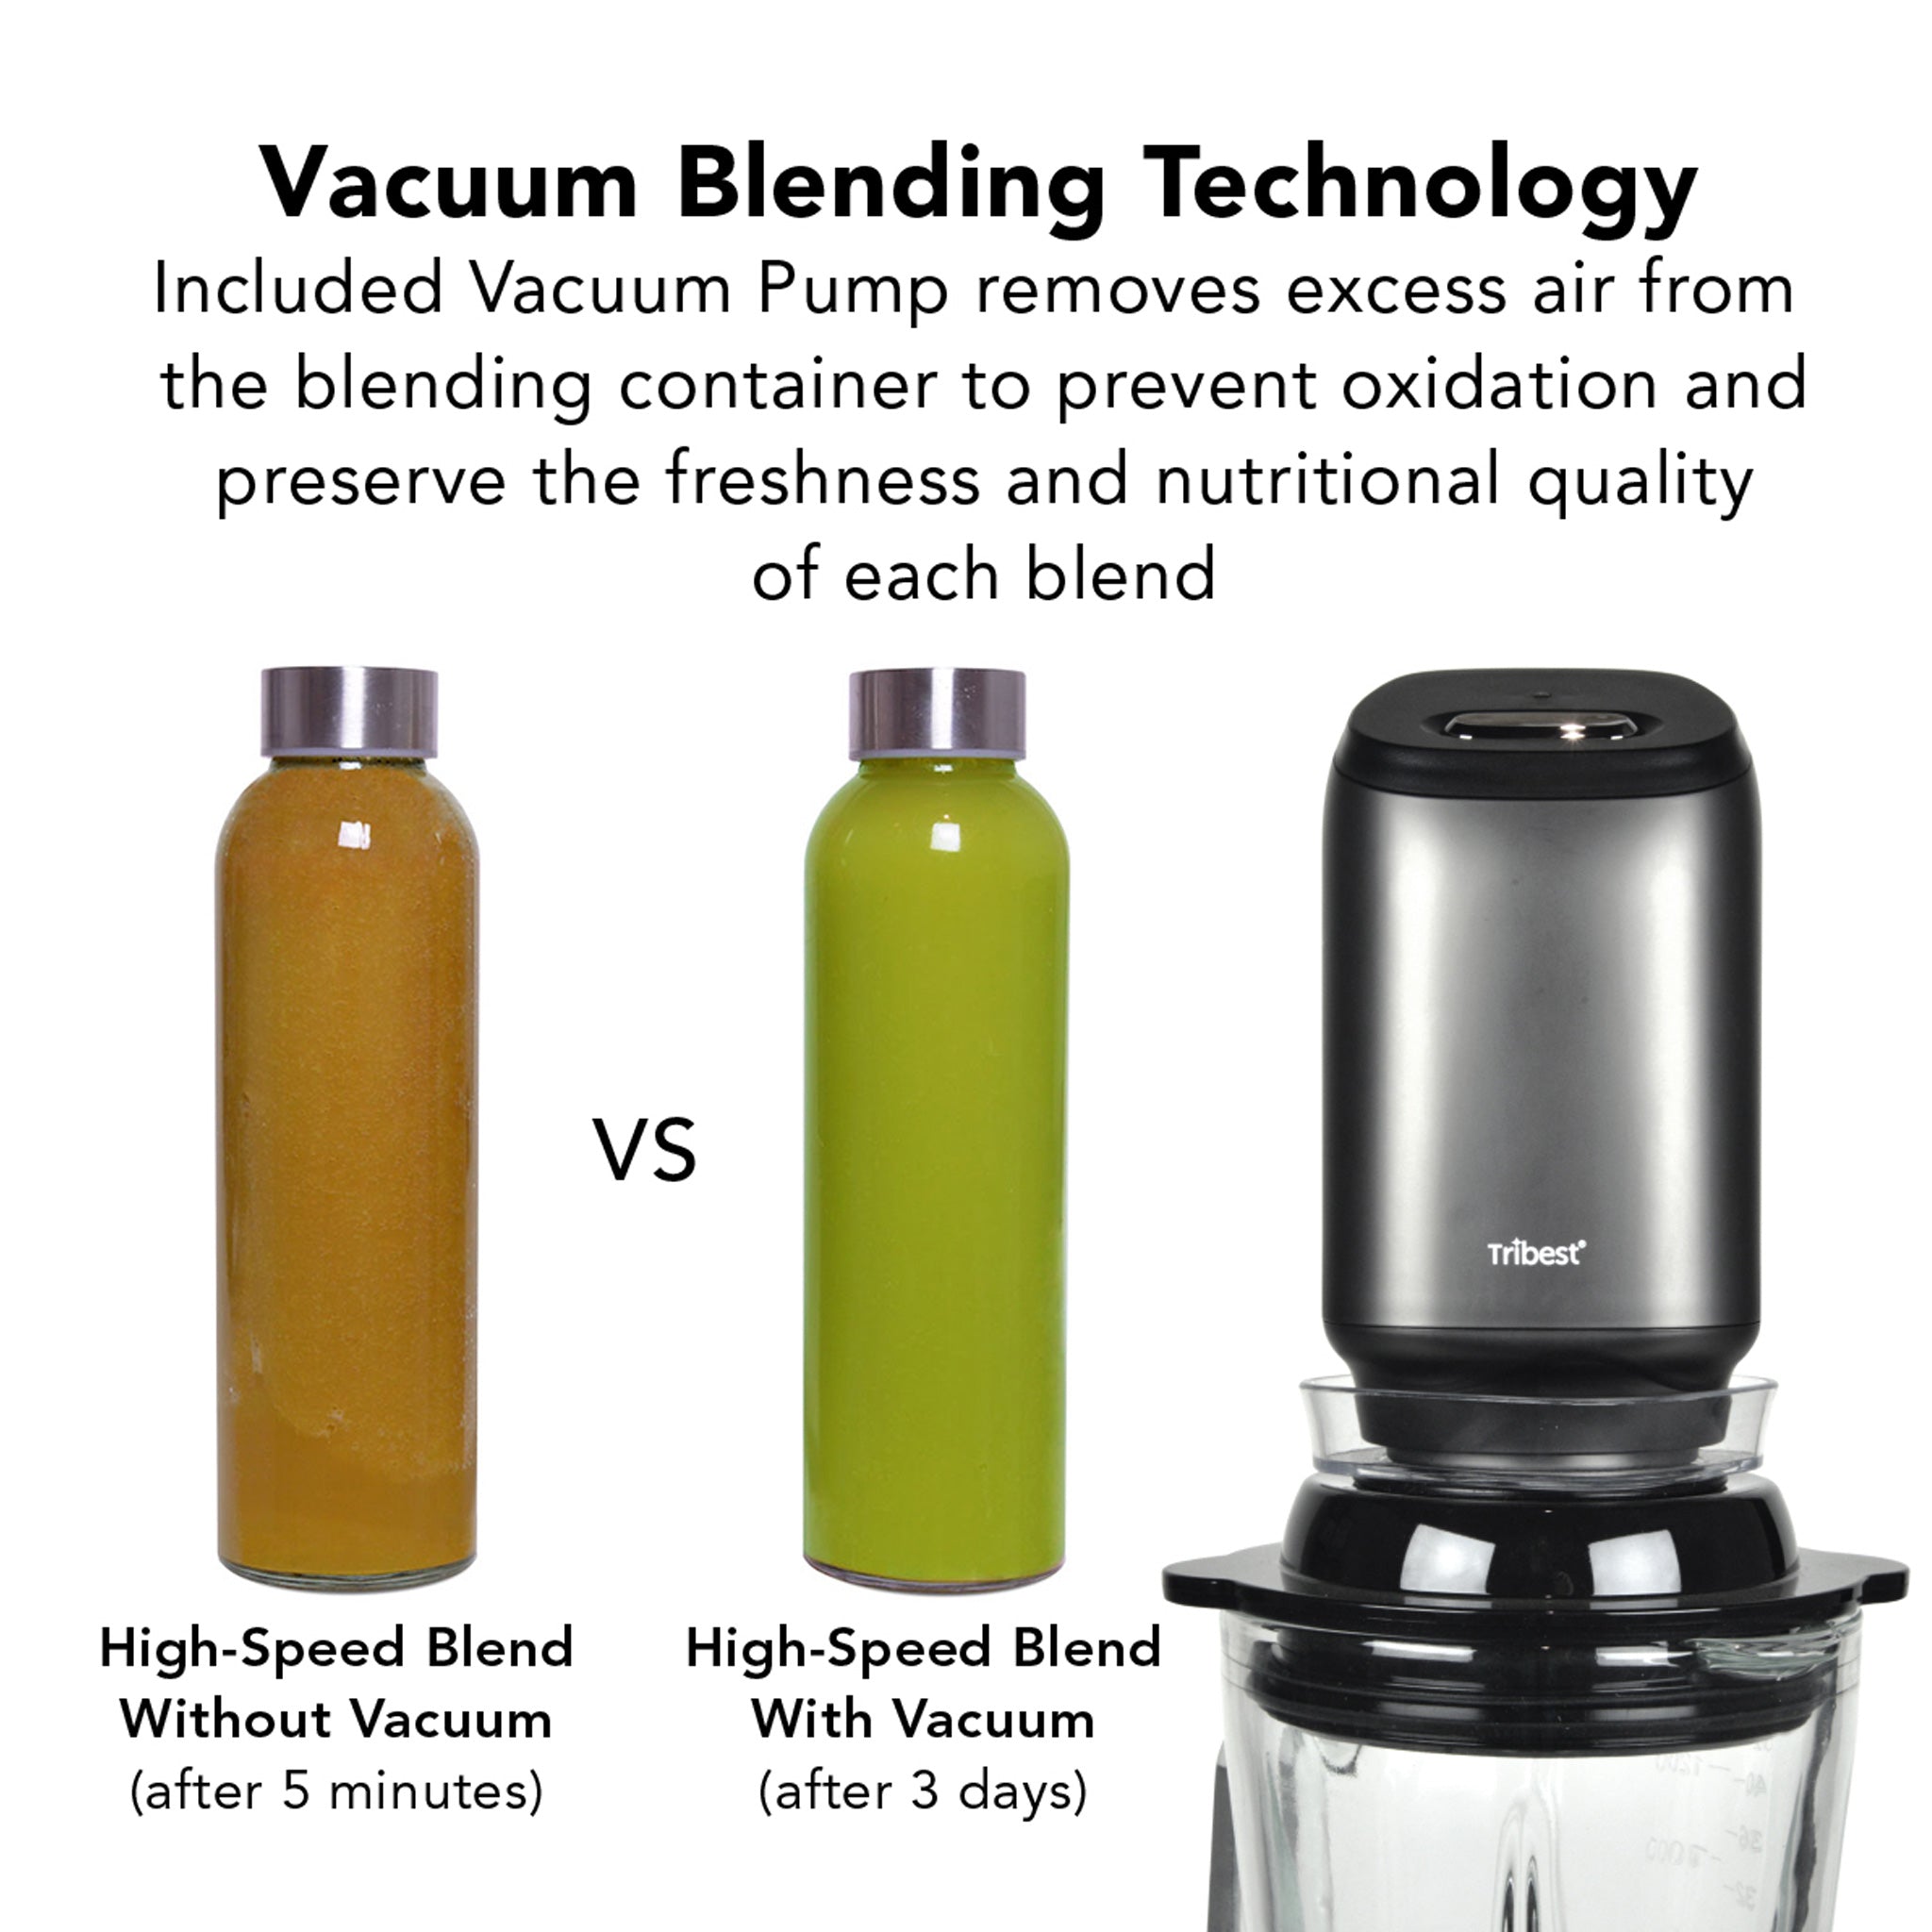 Glass Personal Blender with Vacuum PBG-5001-A - Green Apples Comparison - Tribest